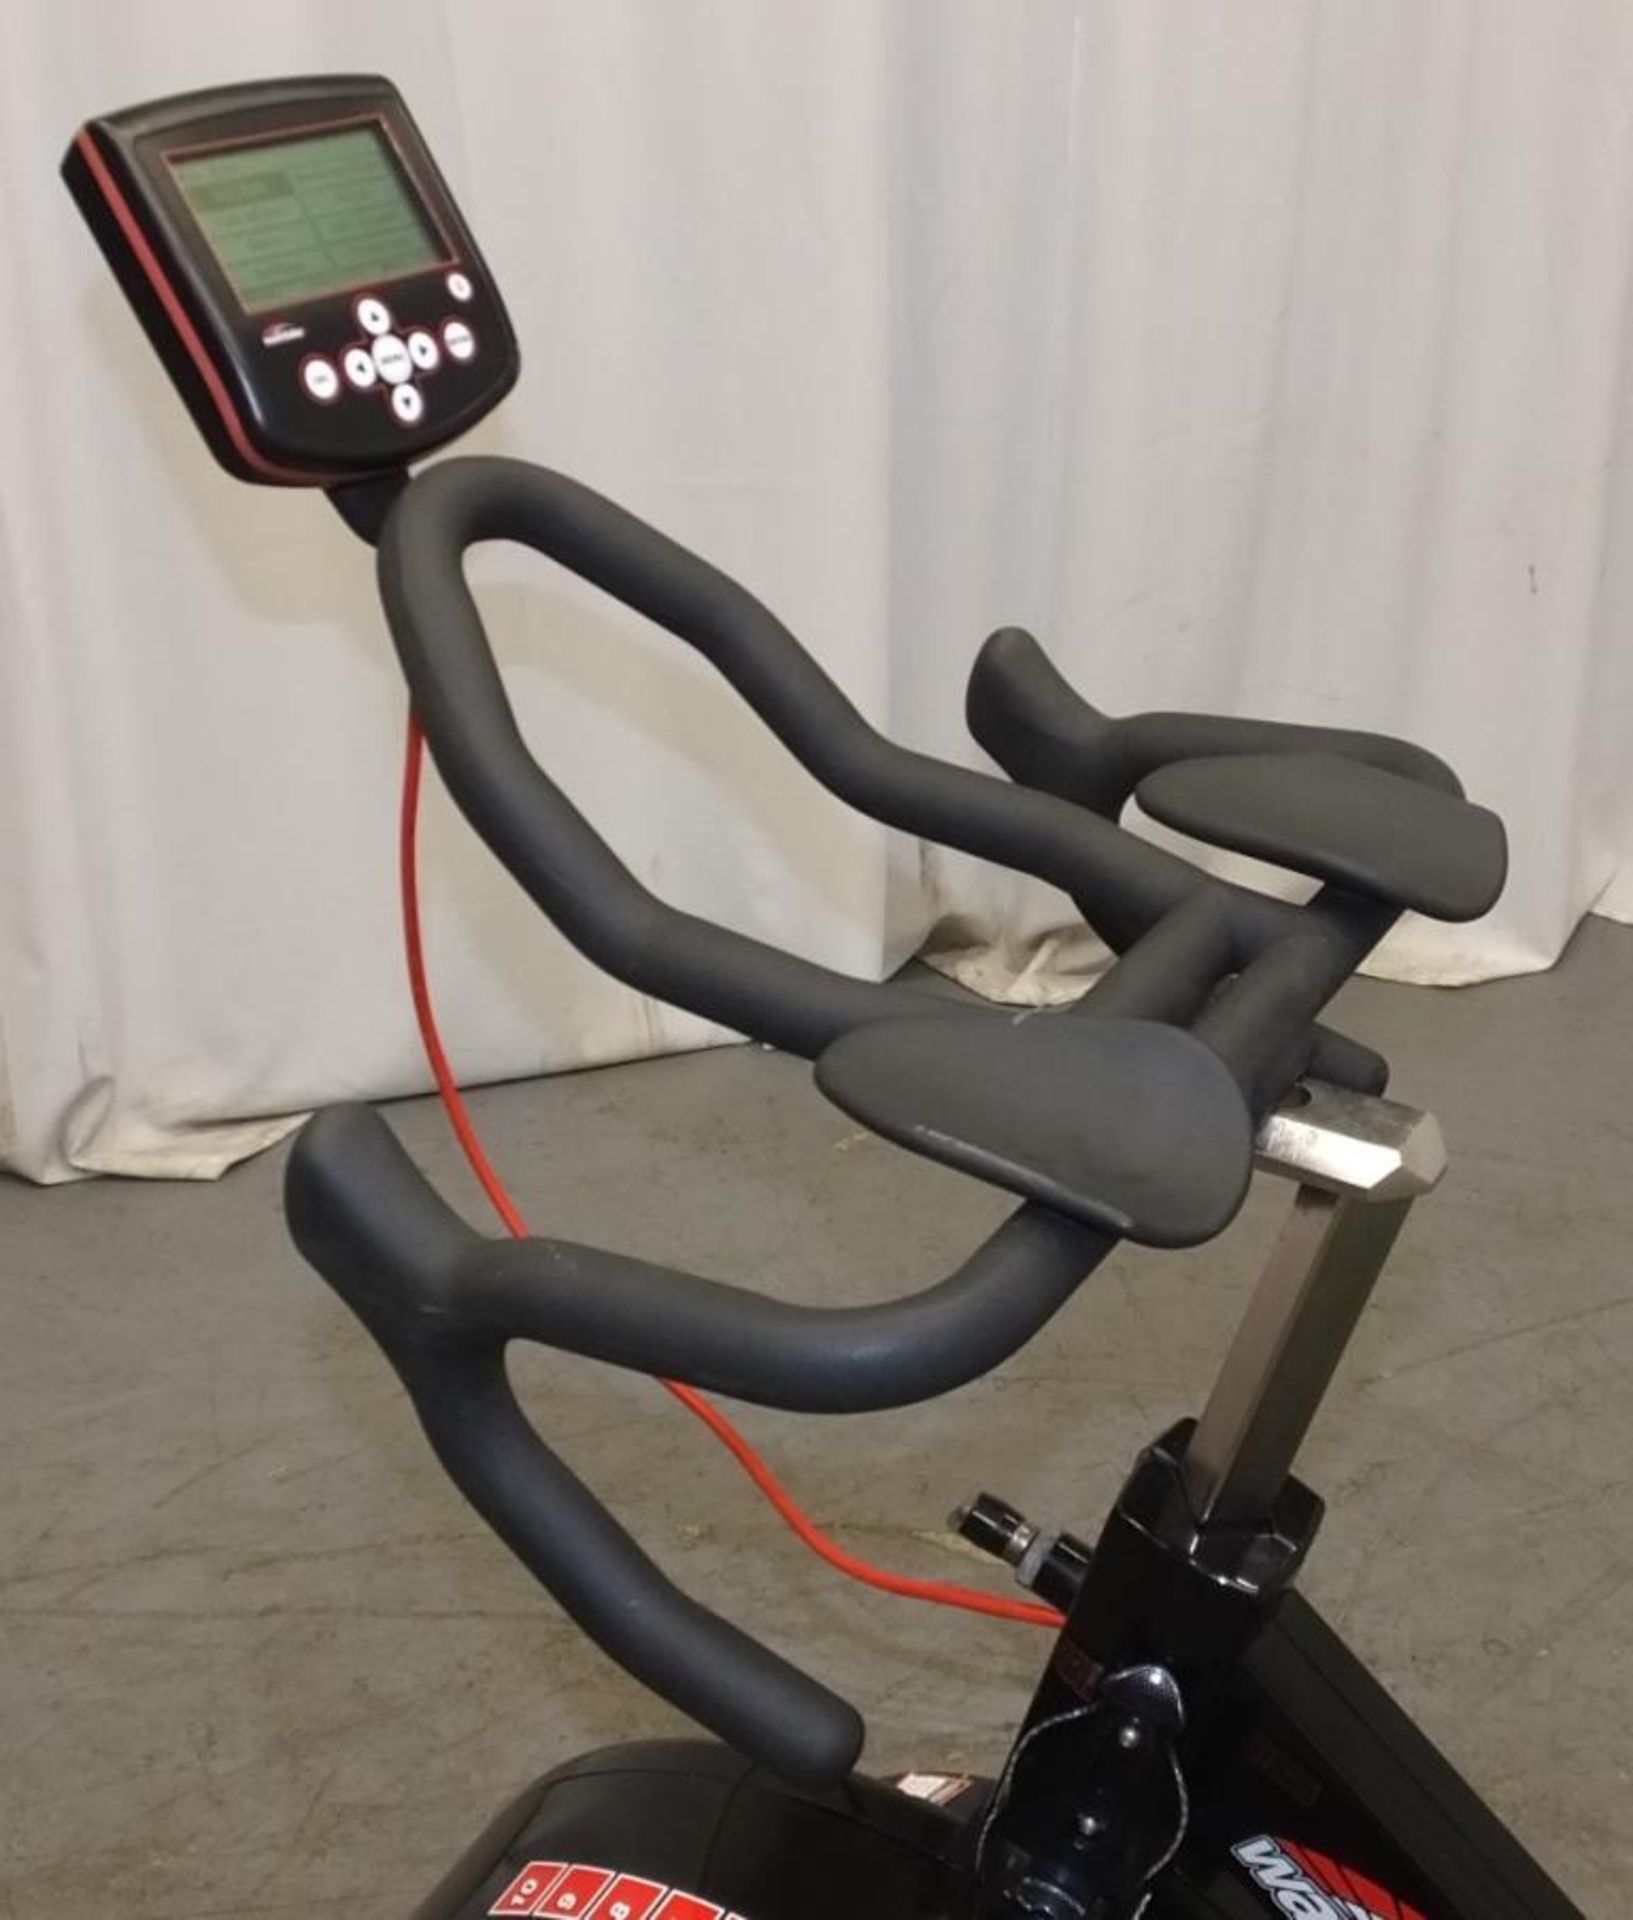 Wattbike Trainer Training Exercise Bike - console powers up - functionality untested - bent cable - Image 3 of 7